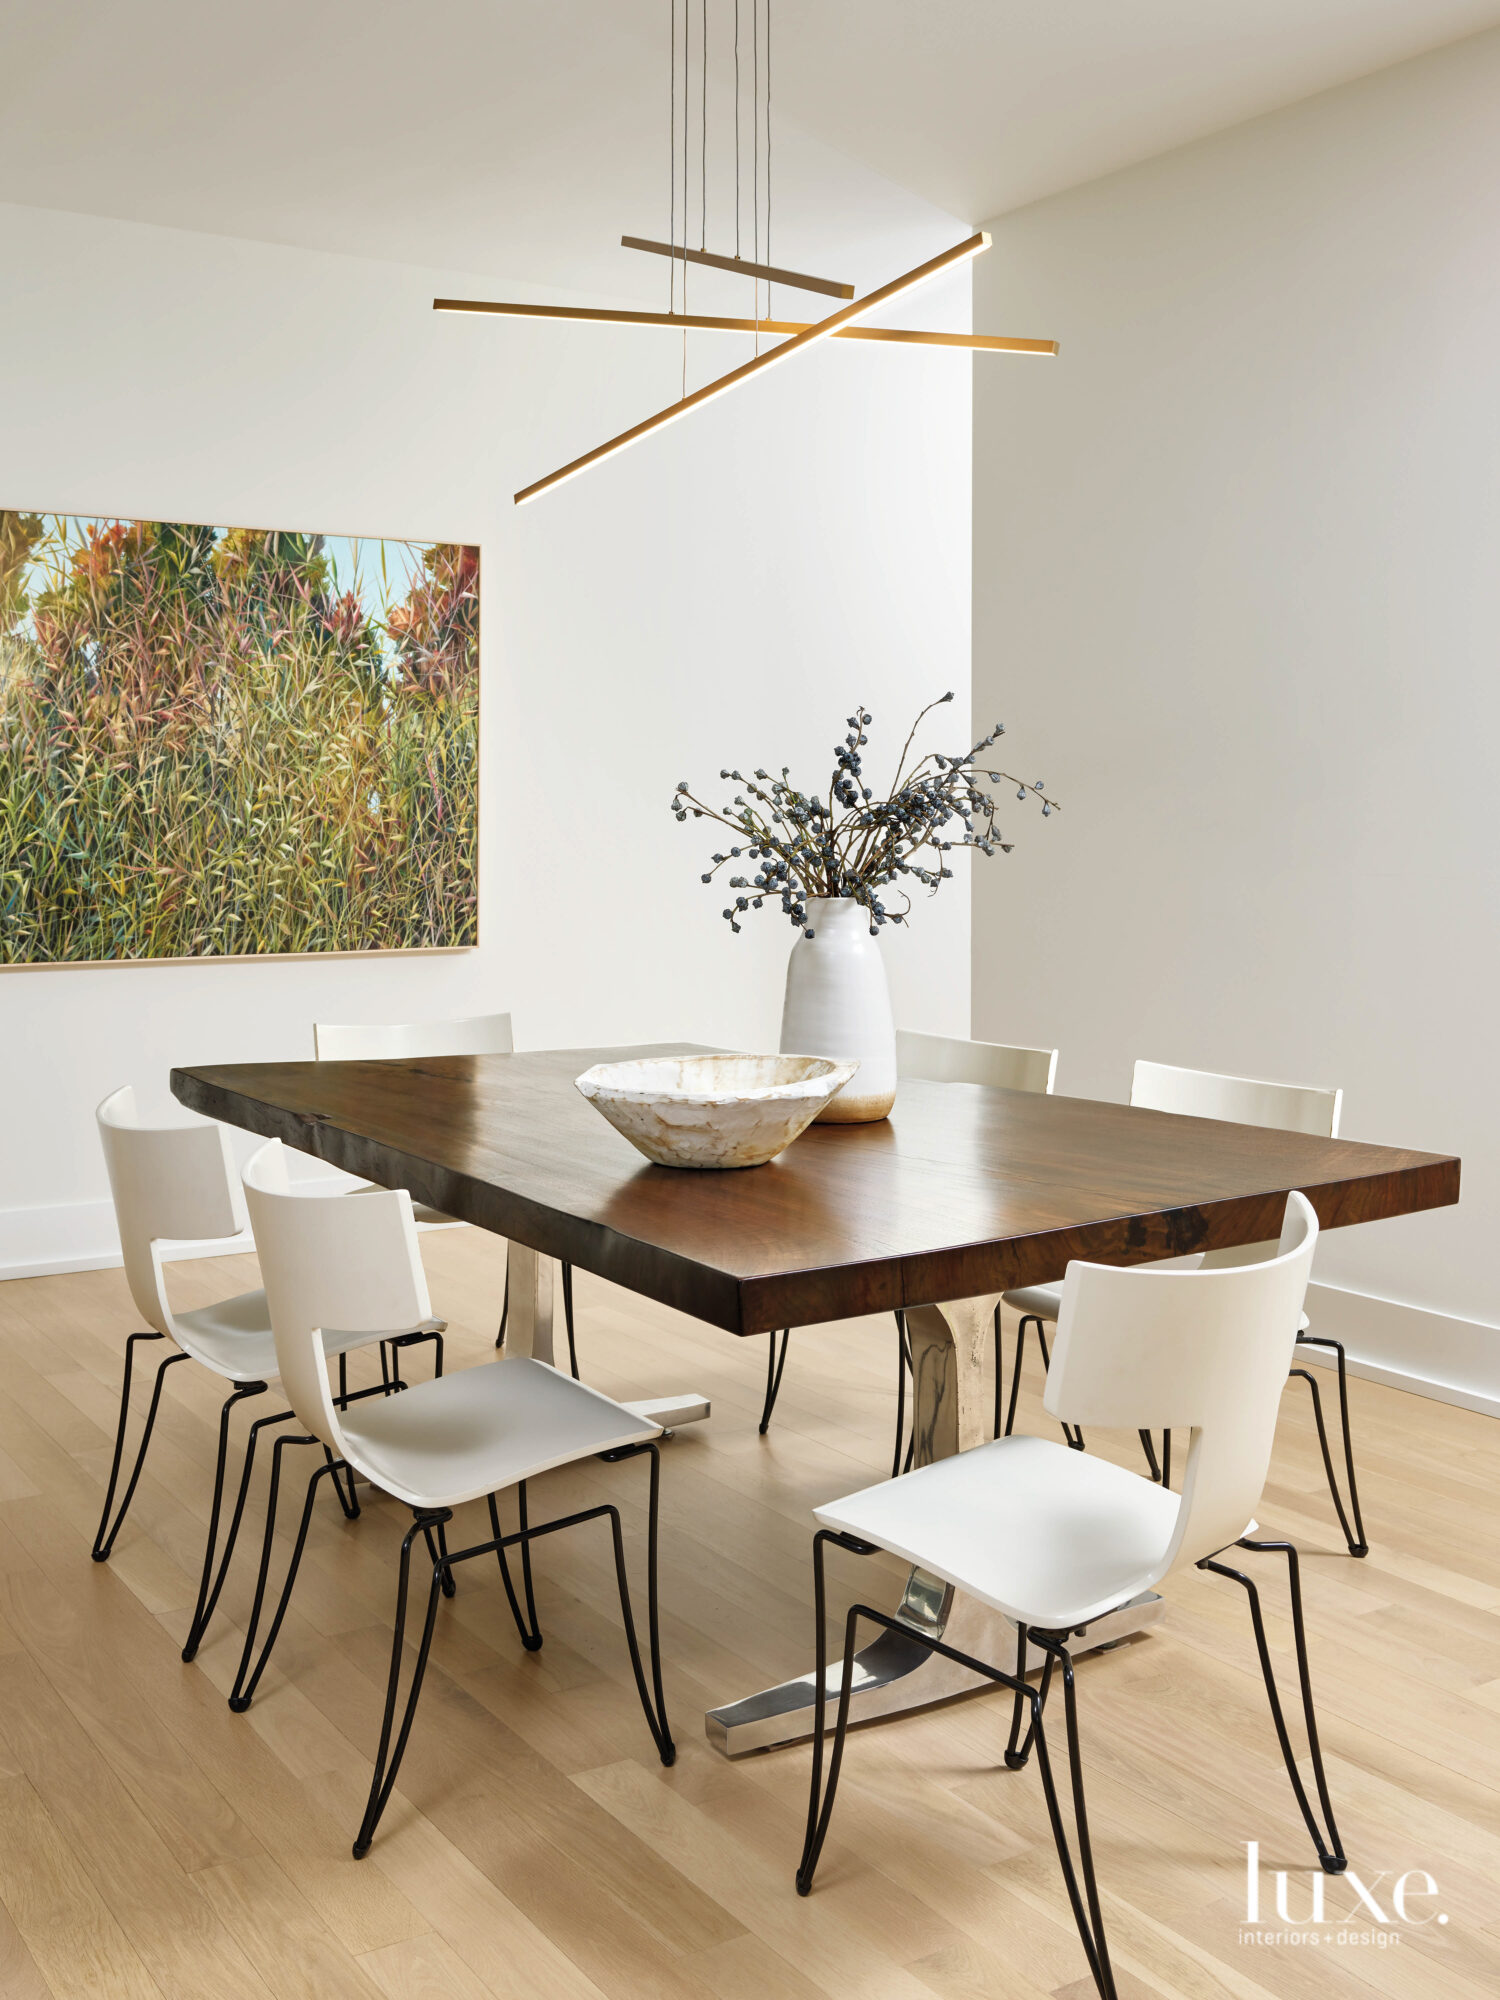 The dining room is minimal with a wood-topped table and modern white chairs.